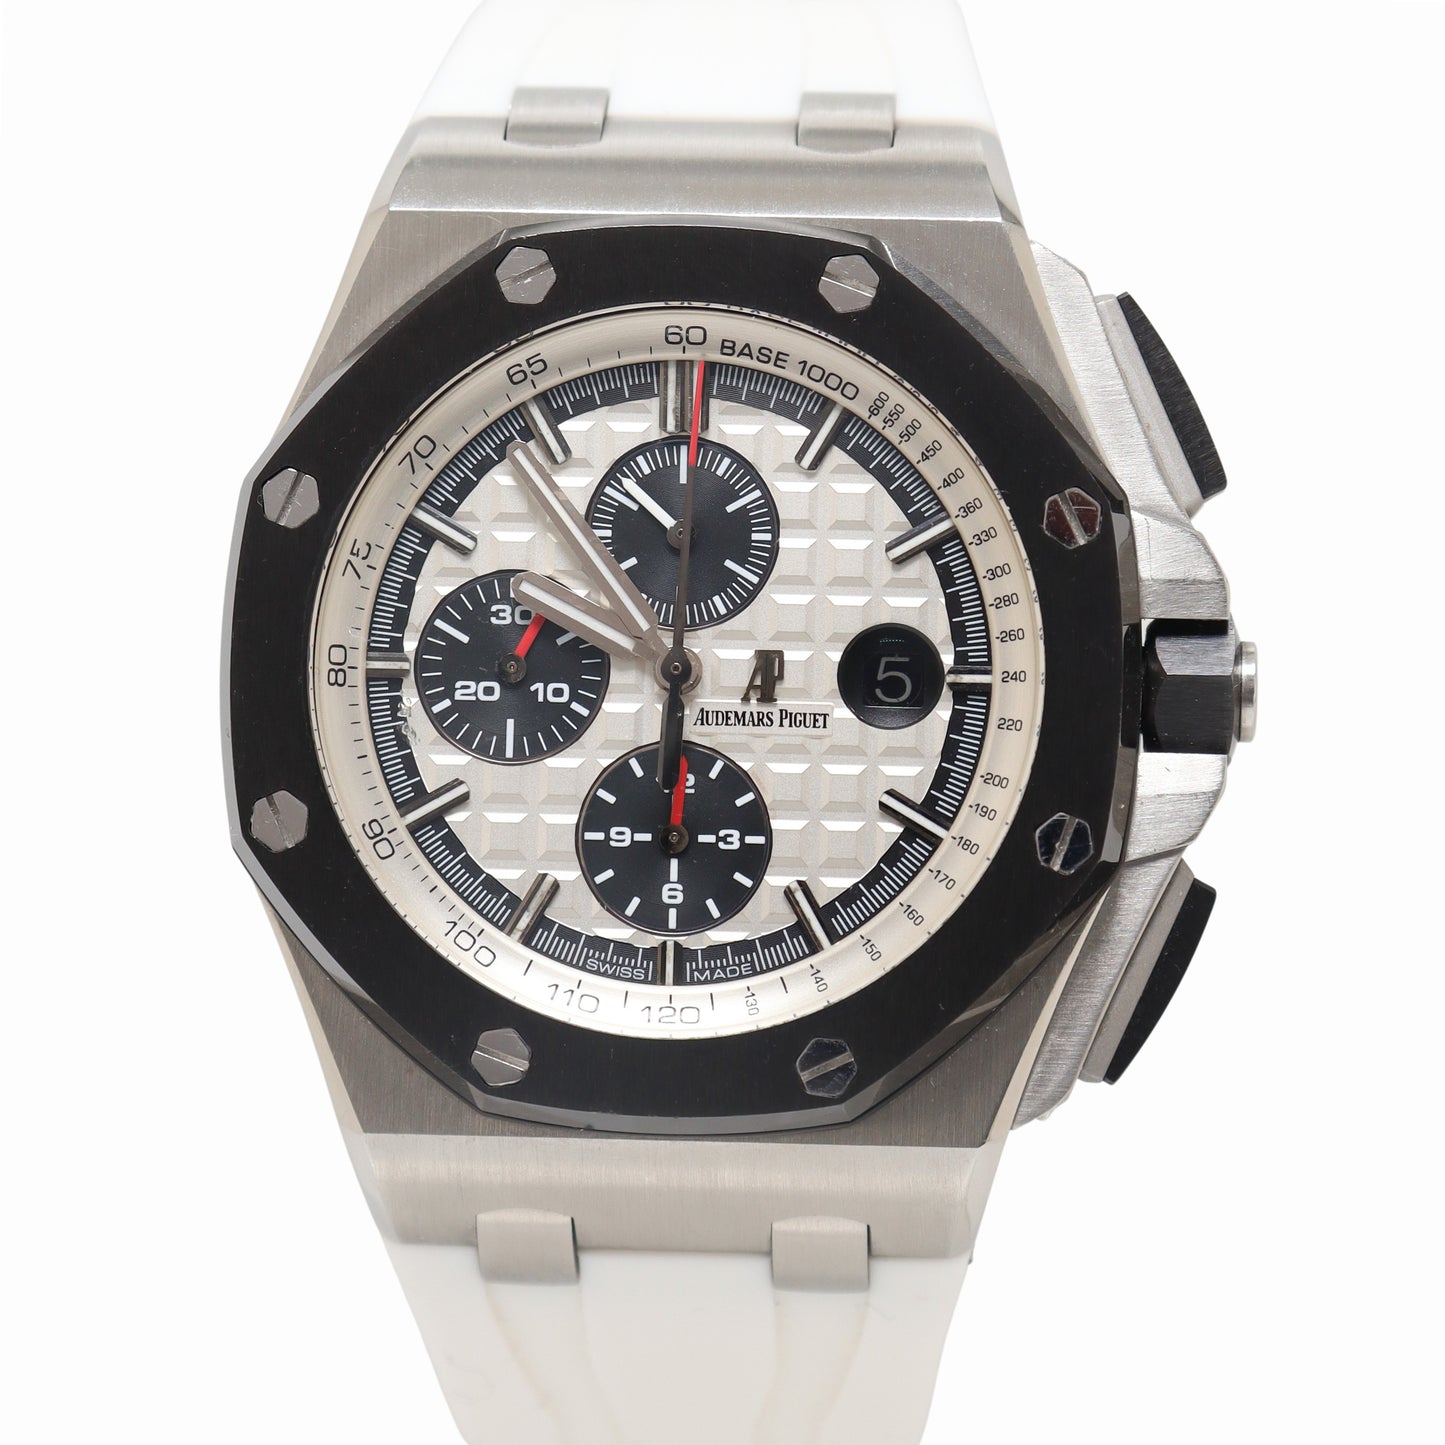 Audemars Piguet Royal Oak Offshore 44mm Stainless Steel Silver Mega Tapisserie Dial Watch Reference# 26400SO.OO.A002CA.01 - Happy Jewelers Fine Jewelry Lifetime Warranty